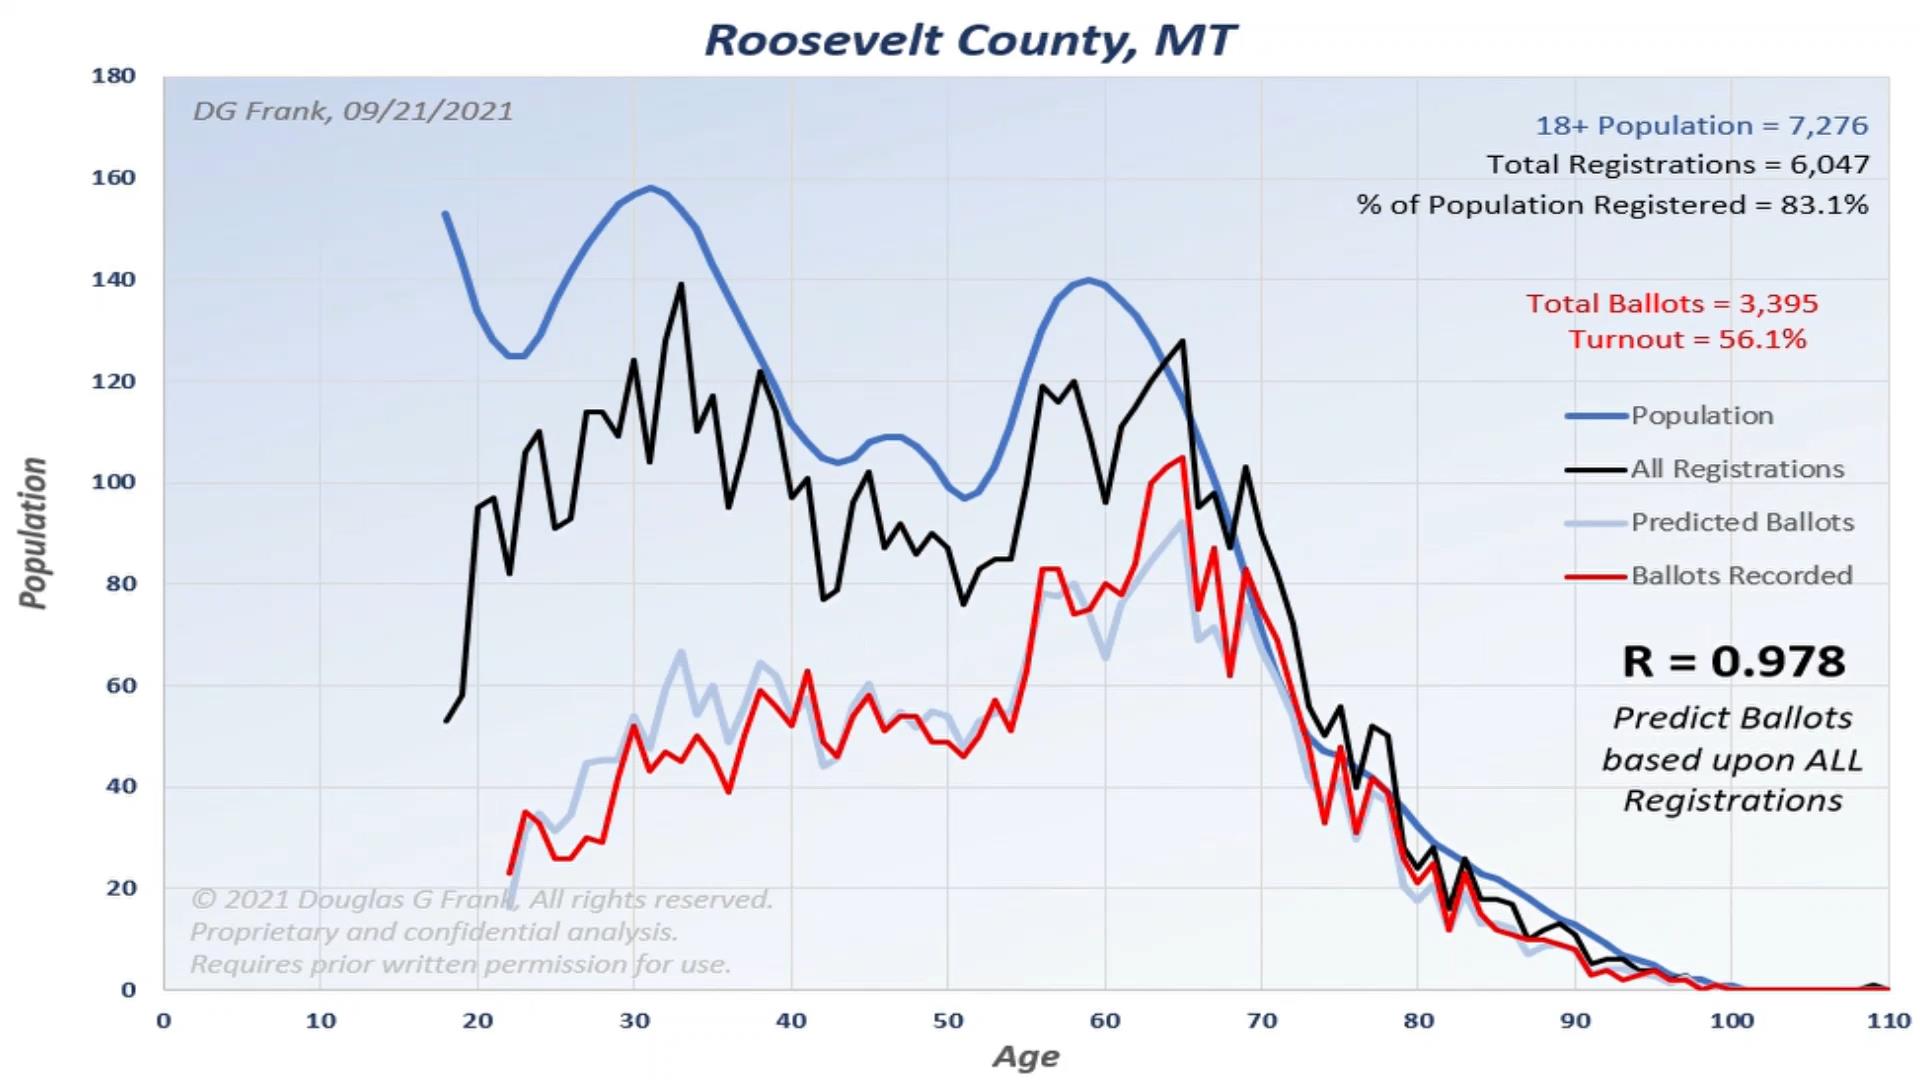 Roosevelt County 2020 Election Analysis Chart by Dr. Doug Frank